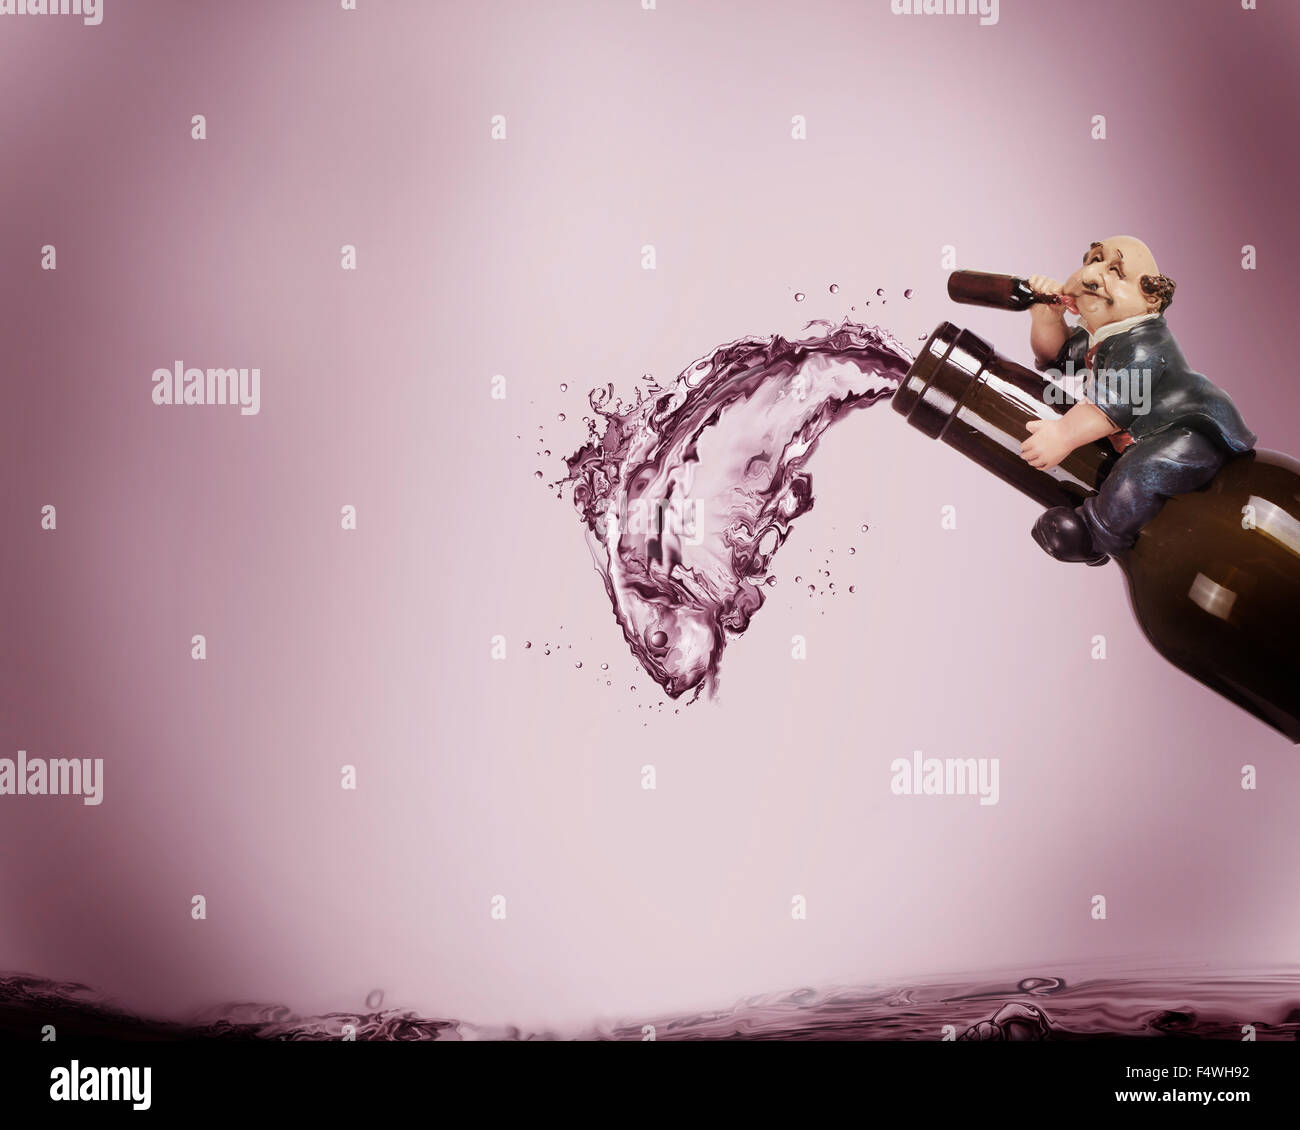 A drunk man sitting of a wine bottle imagining an illusion of a fish made of wine spilling out of the bottle. Stock Photo